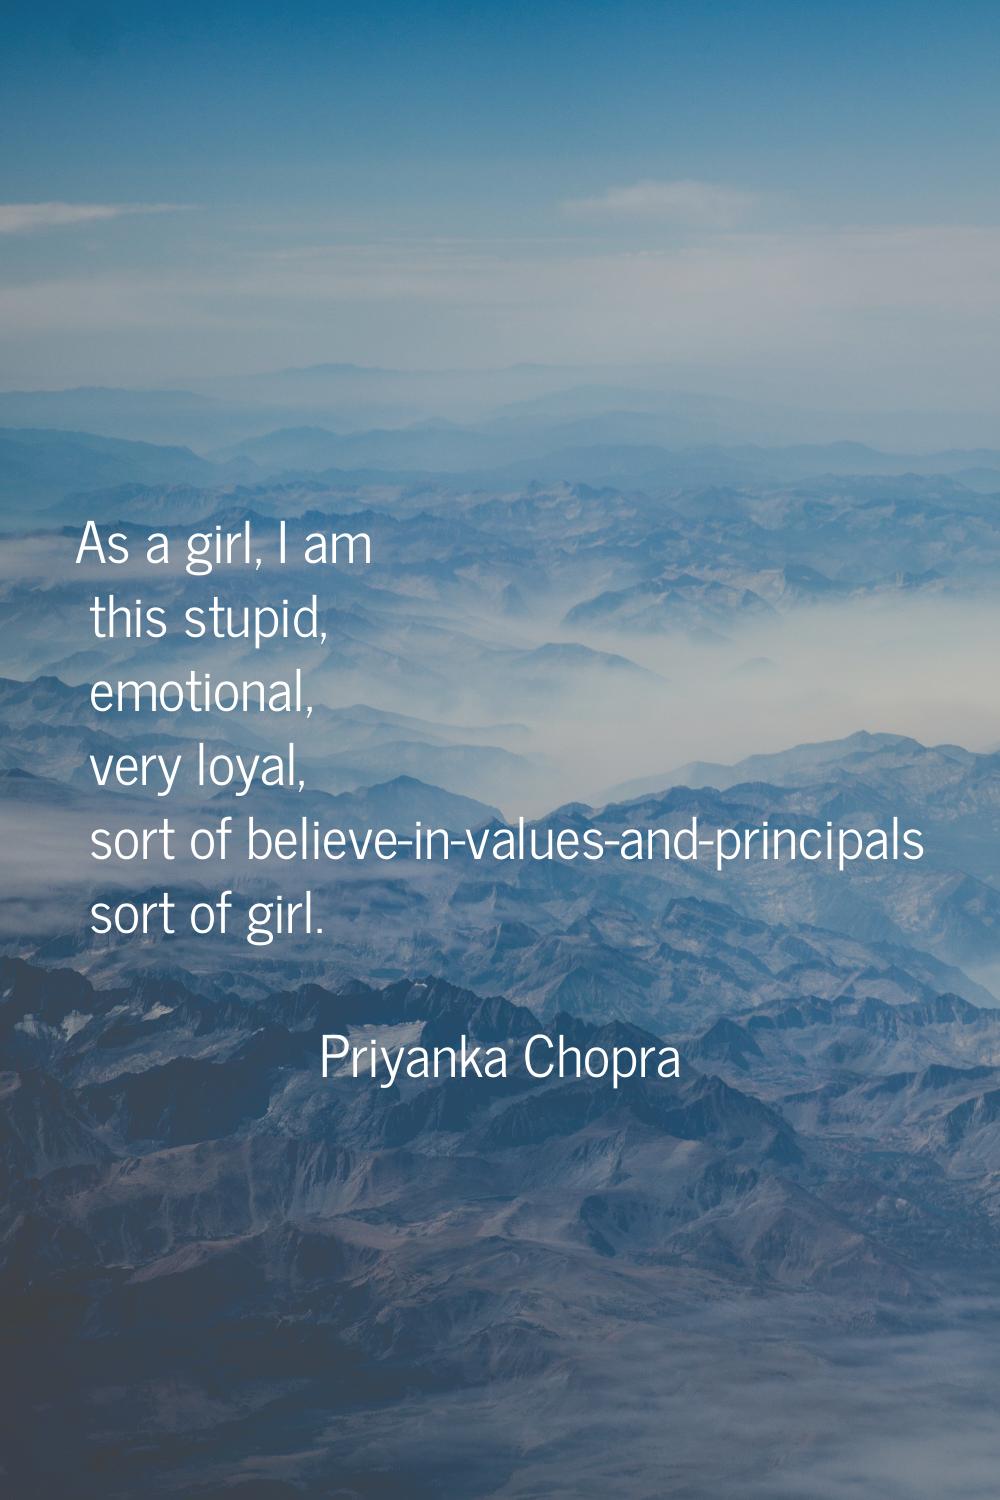 As a girl, I am this stupid, emotional, very loyal, sort of believe-in-values-and-principals sort o